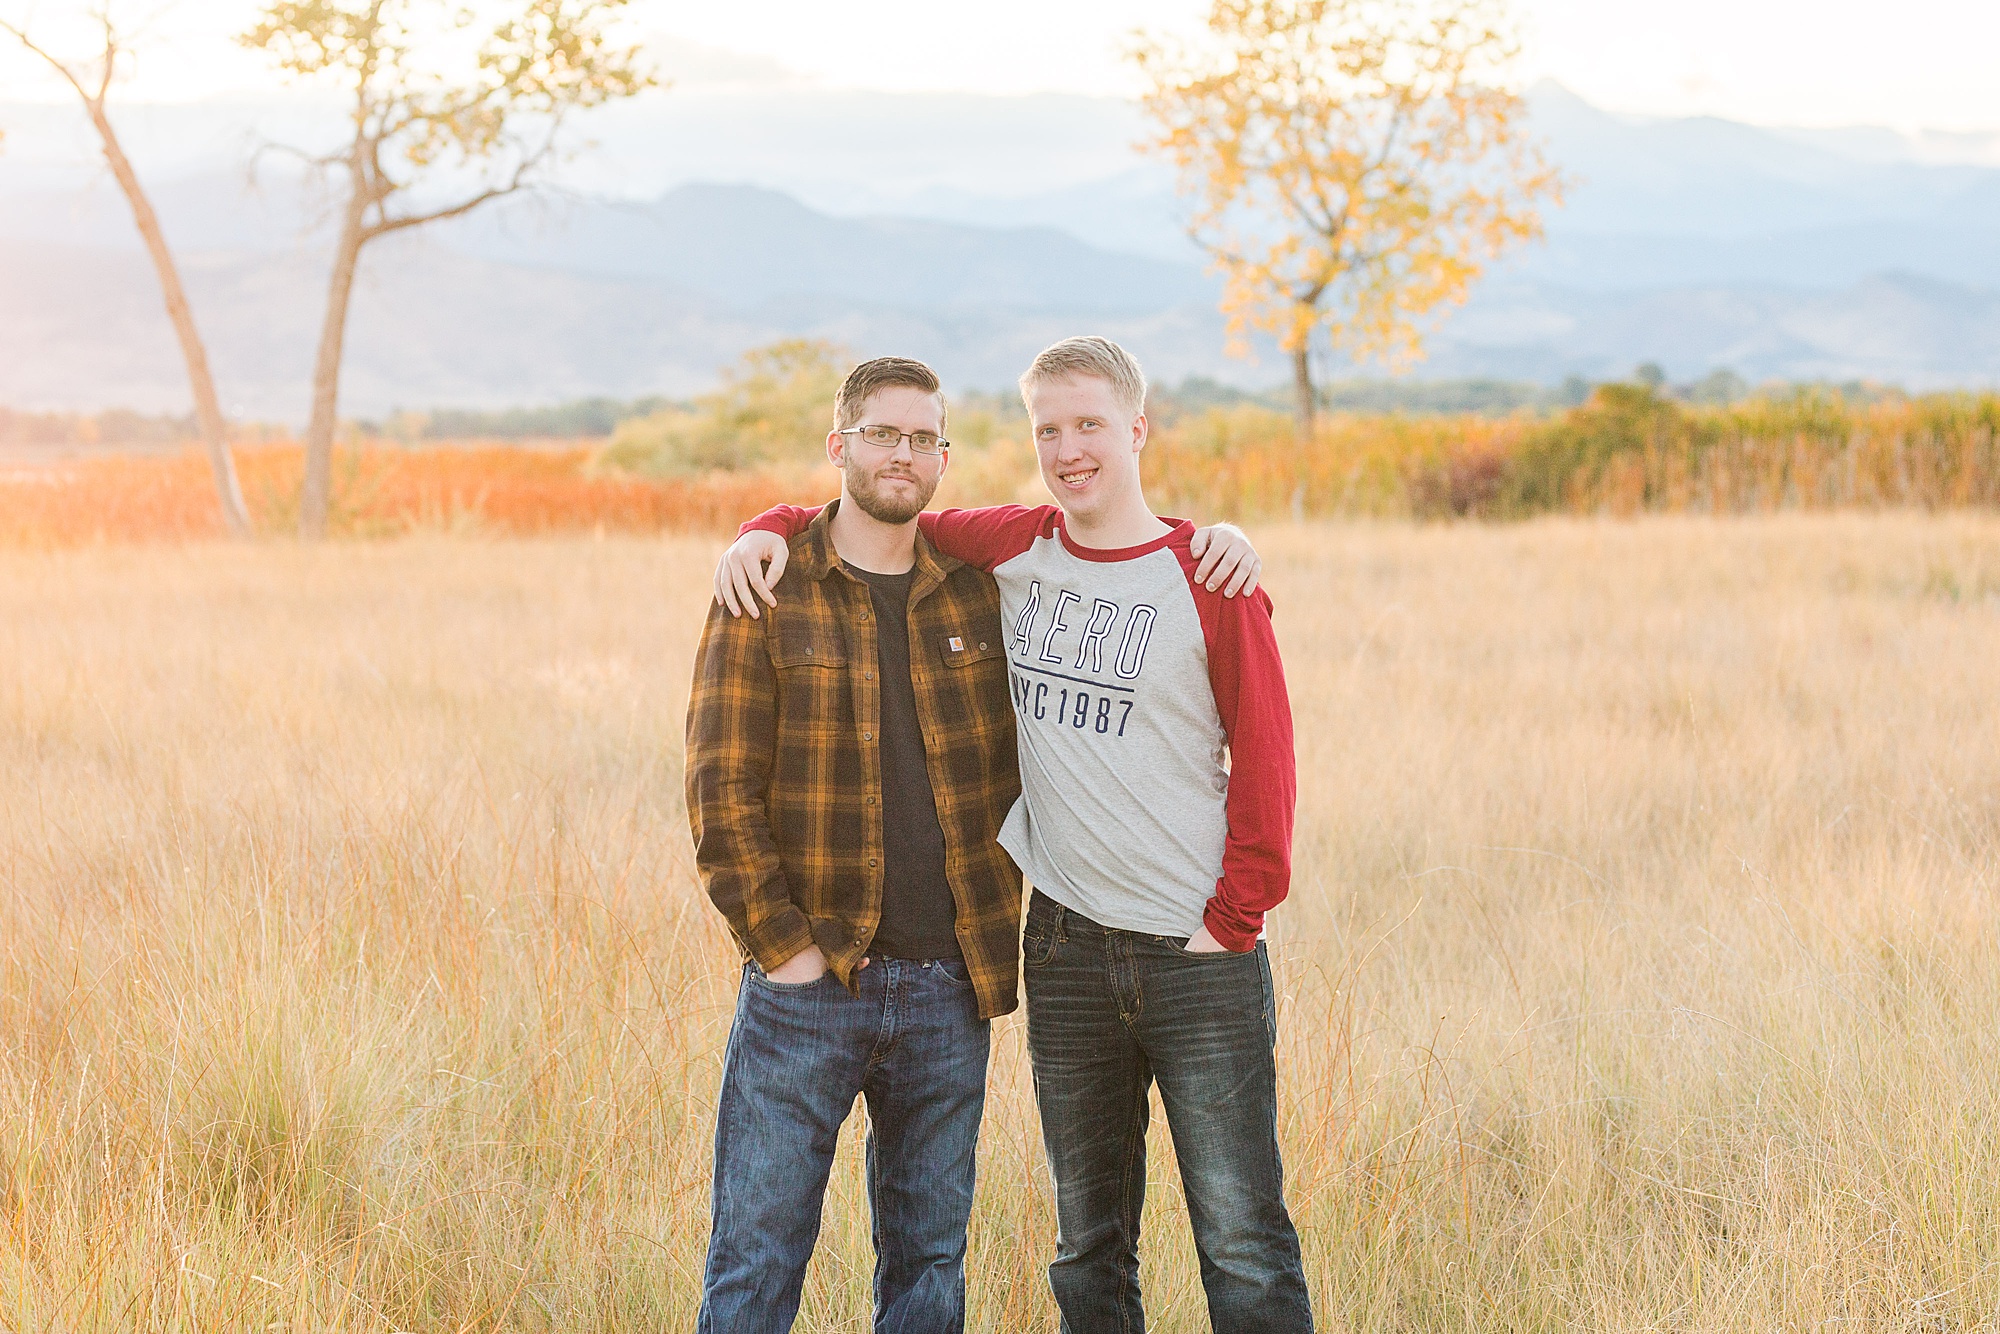 brothers hug in a field of grass